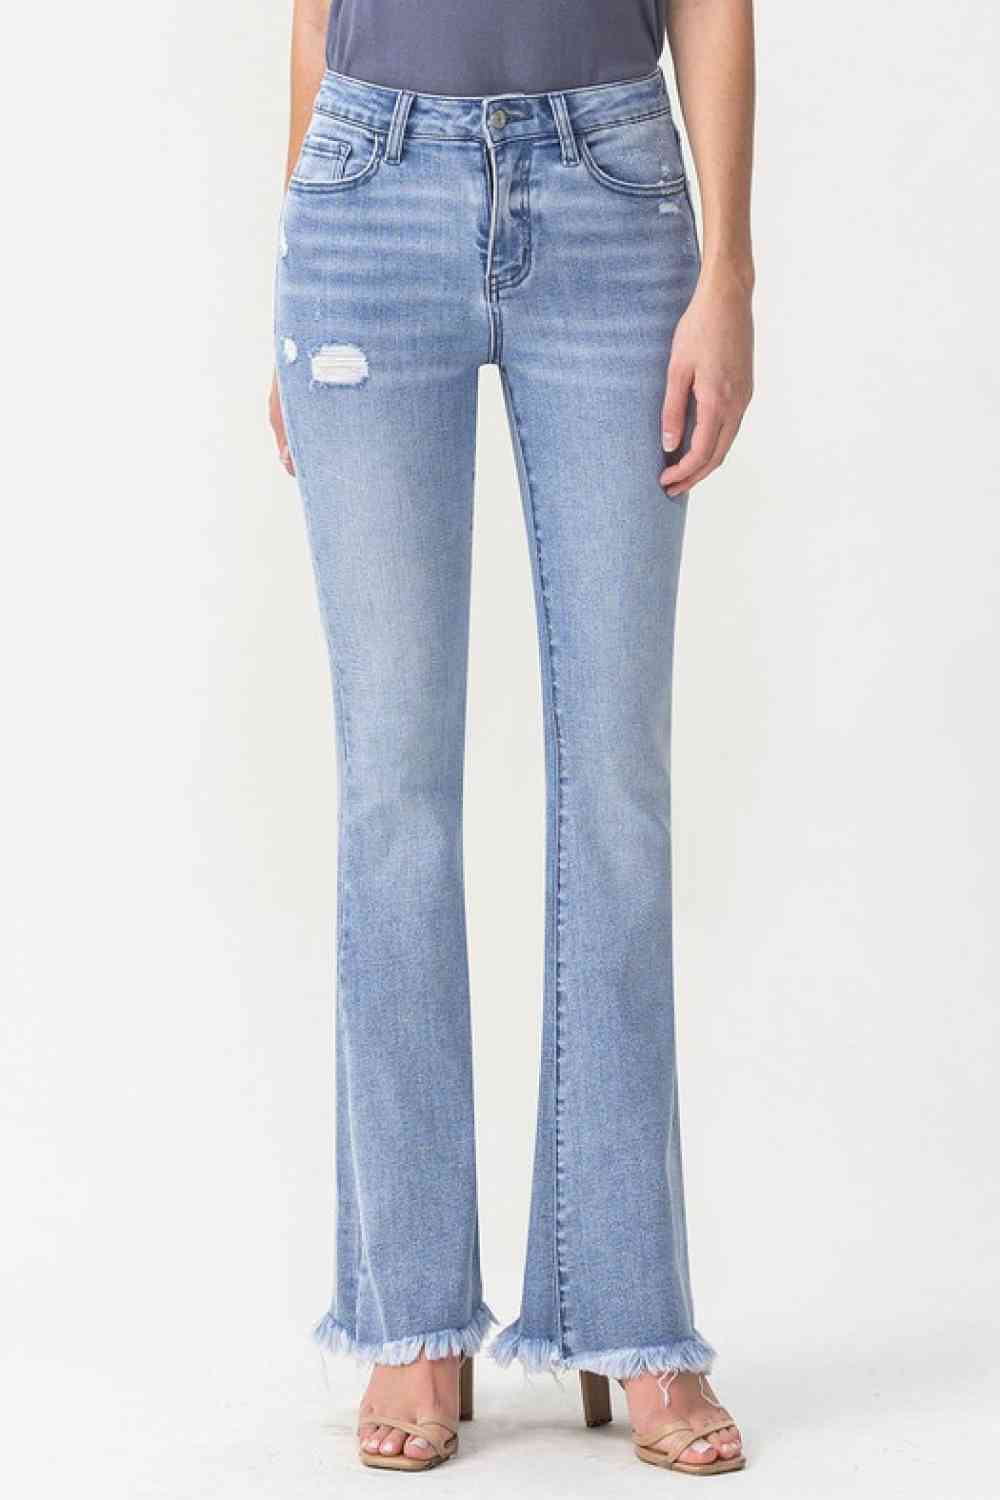 Full Size Evie High Rise Fray Flare Jeans - Kawaii Stop - Casual Style, Comfortable Fit, Distressed Details, Fashion Forward, Full Size Range, Must-Have Jeans, Off-Season Mega Sale, Ship from USA, Trendy Fashion, Vervet, Weekend Chic, Women's Wardrobe